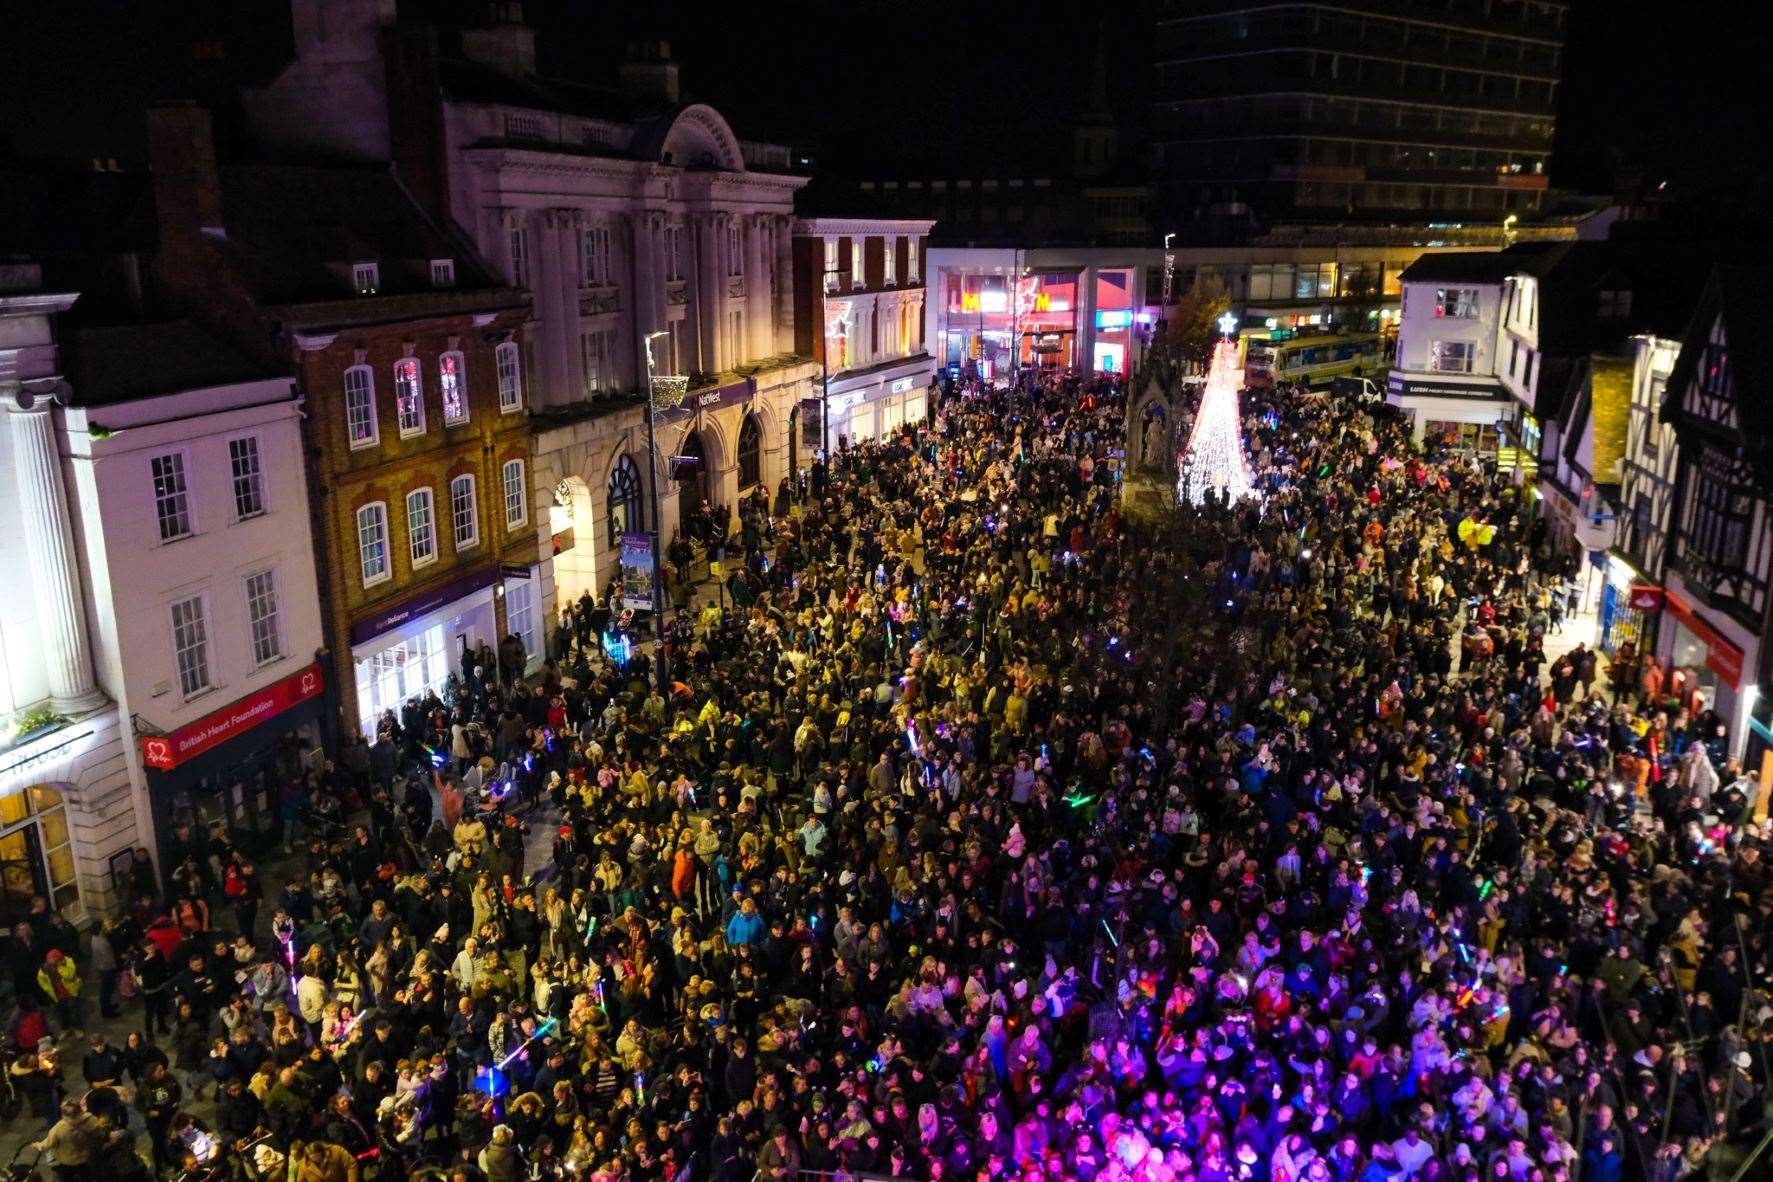 Crowds gathered for the Maidstone Christmas light switch on last week